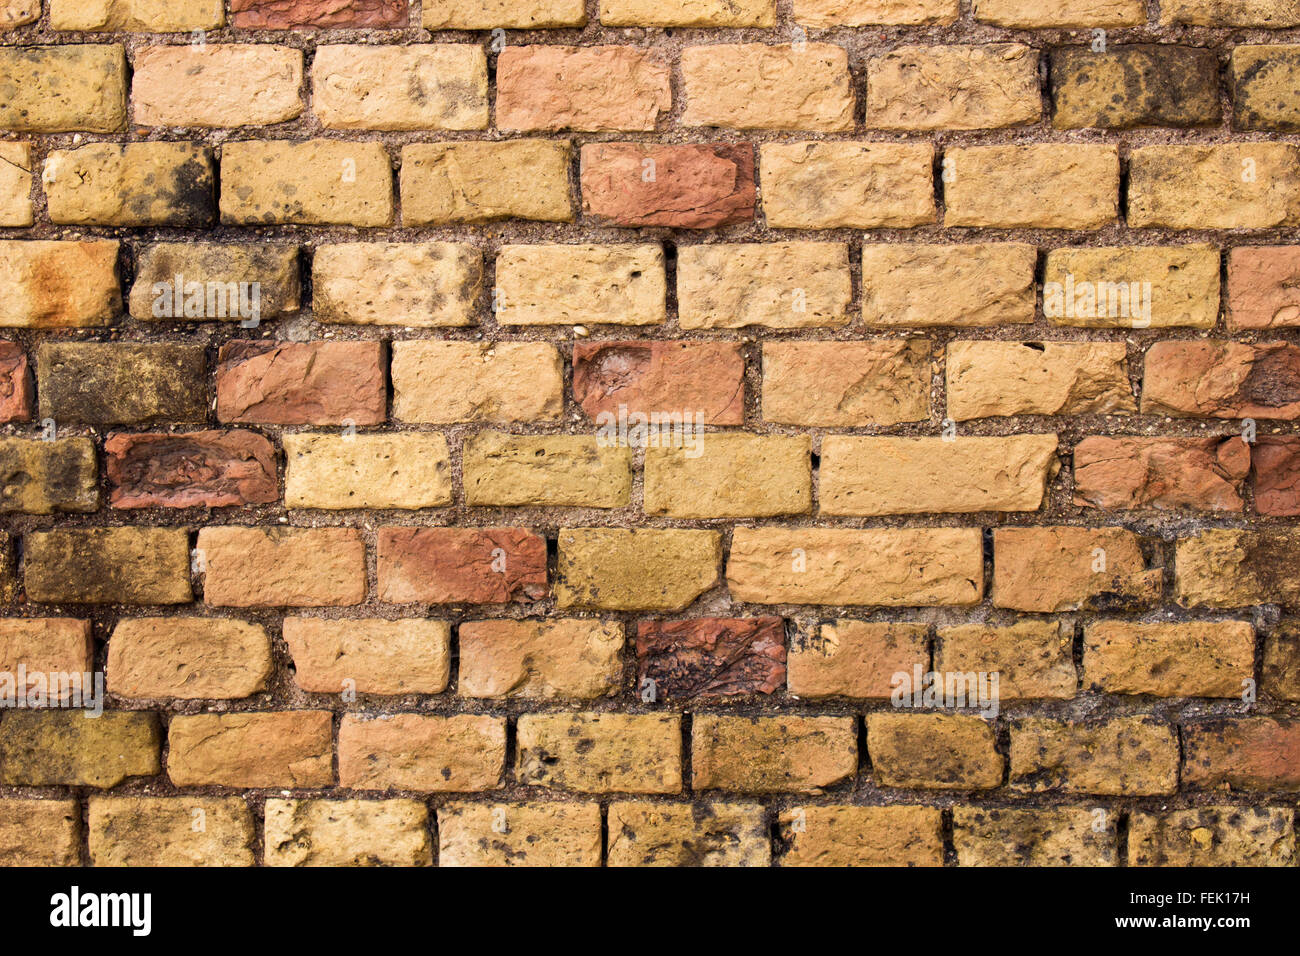 old, textured bricks wall background. construction weathered, rough surface. grungy, abstract wallpaper Stock Photo